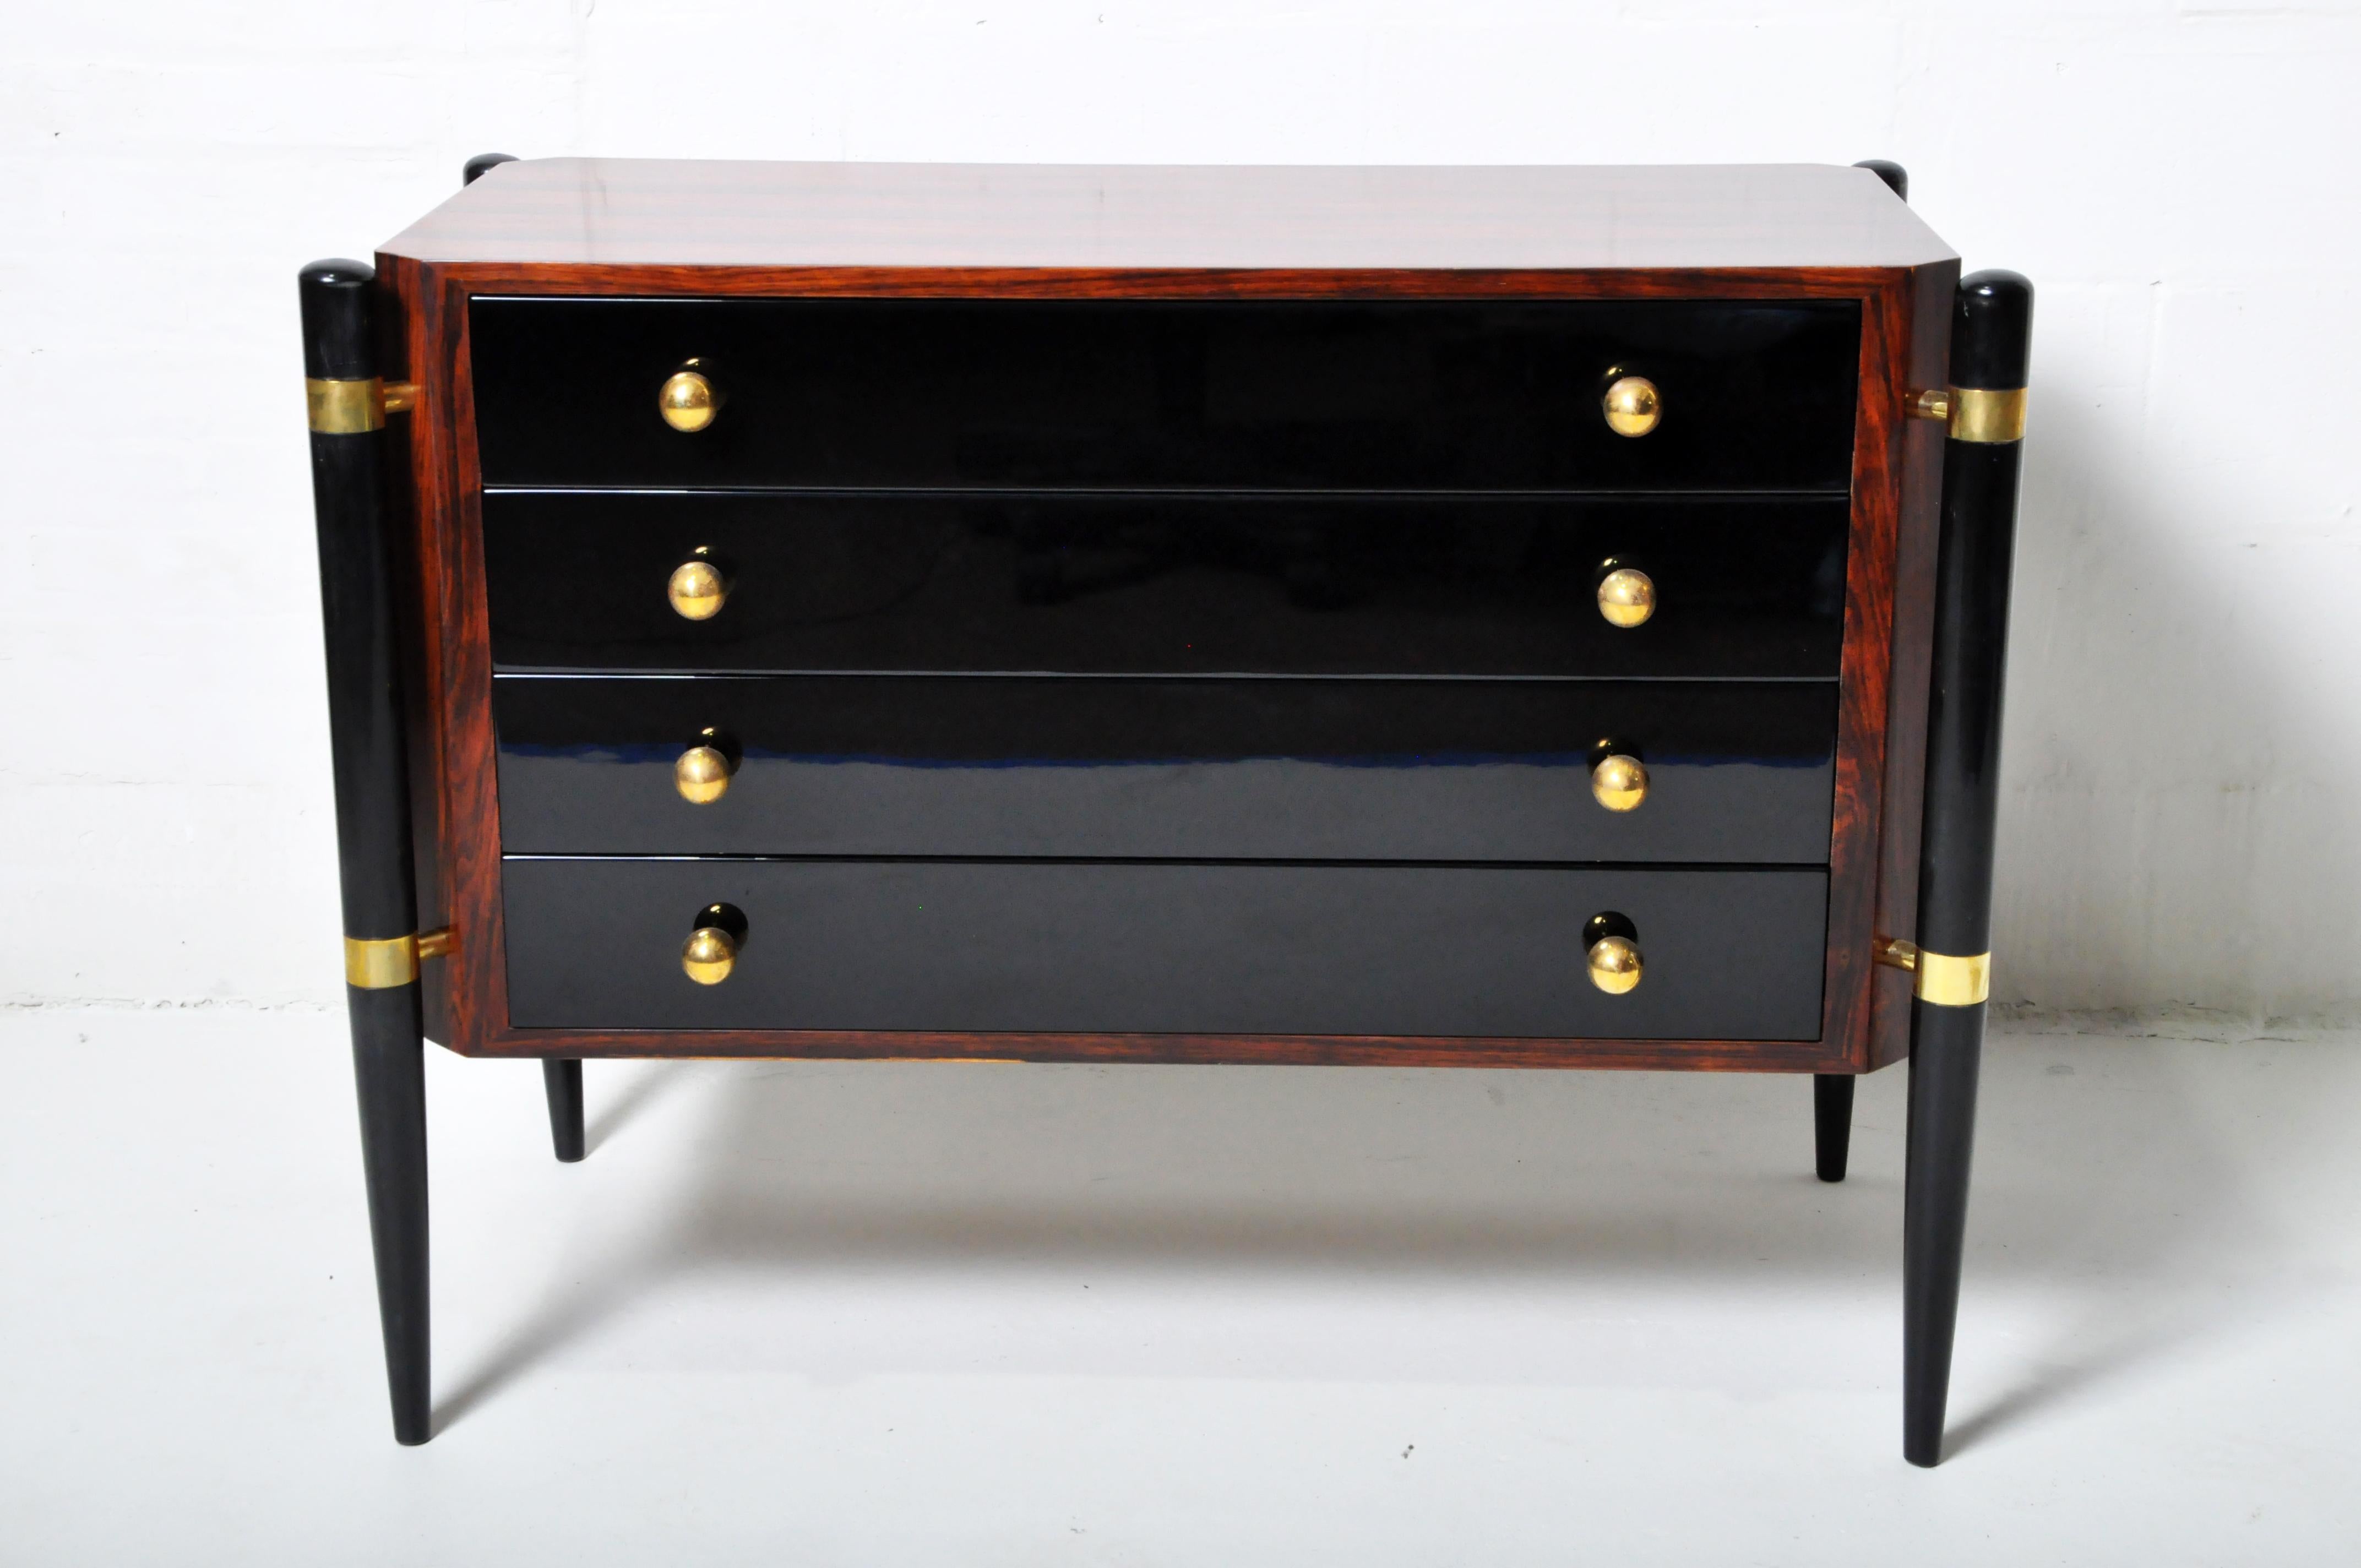 This chest of drawers features a highly polished lacquered finish. The chest dates to the 1960's but has been totally restored. The legs and drawer fronts are black-lacquer over poplar wood. The case is covered in Macassar veneer. The knobs are